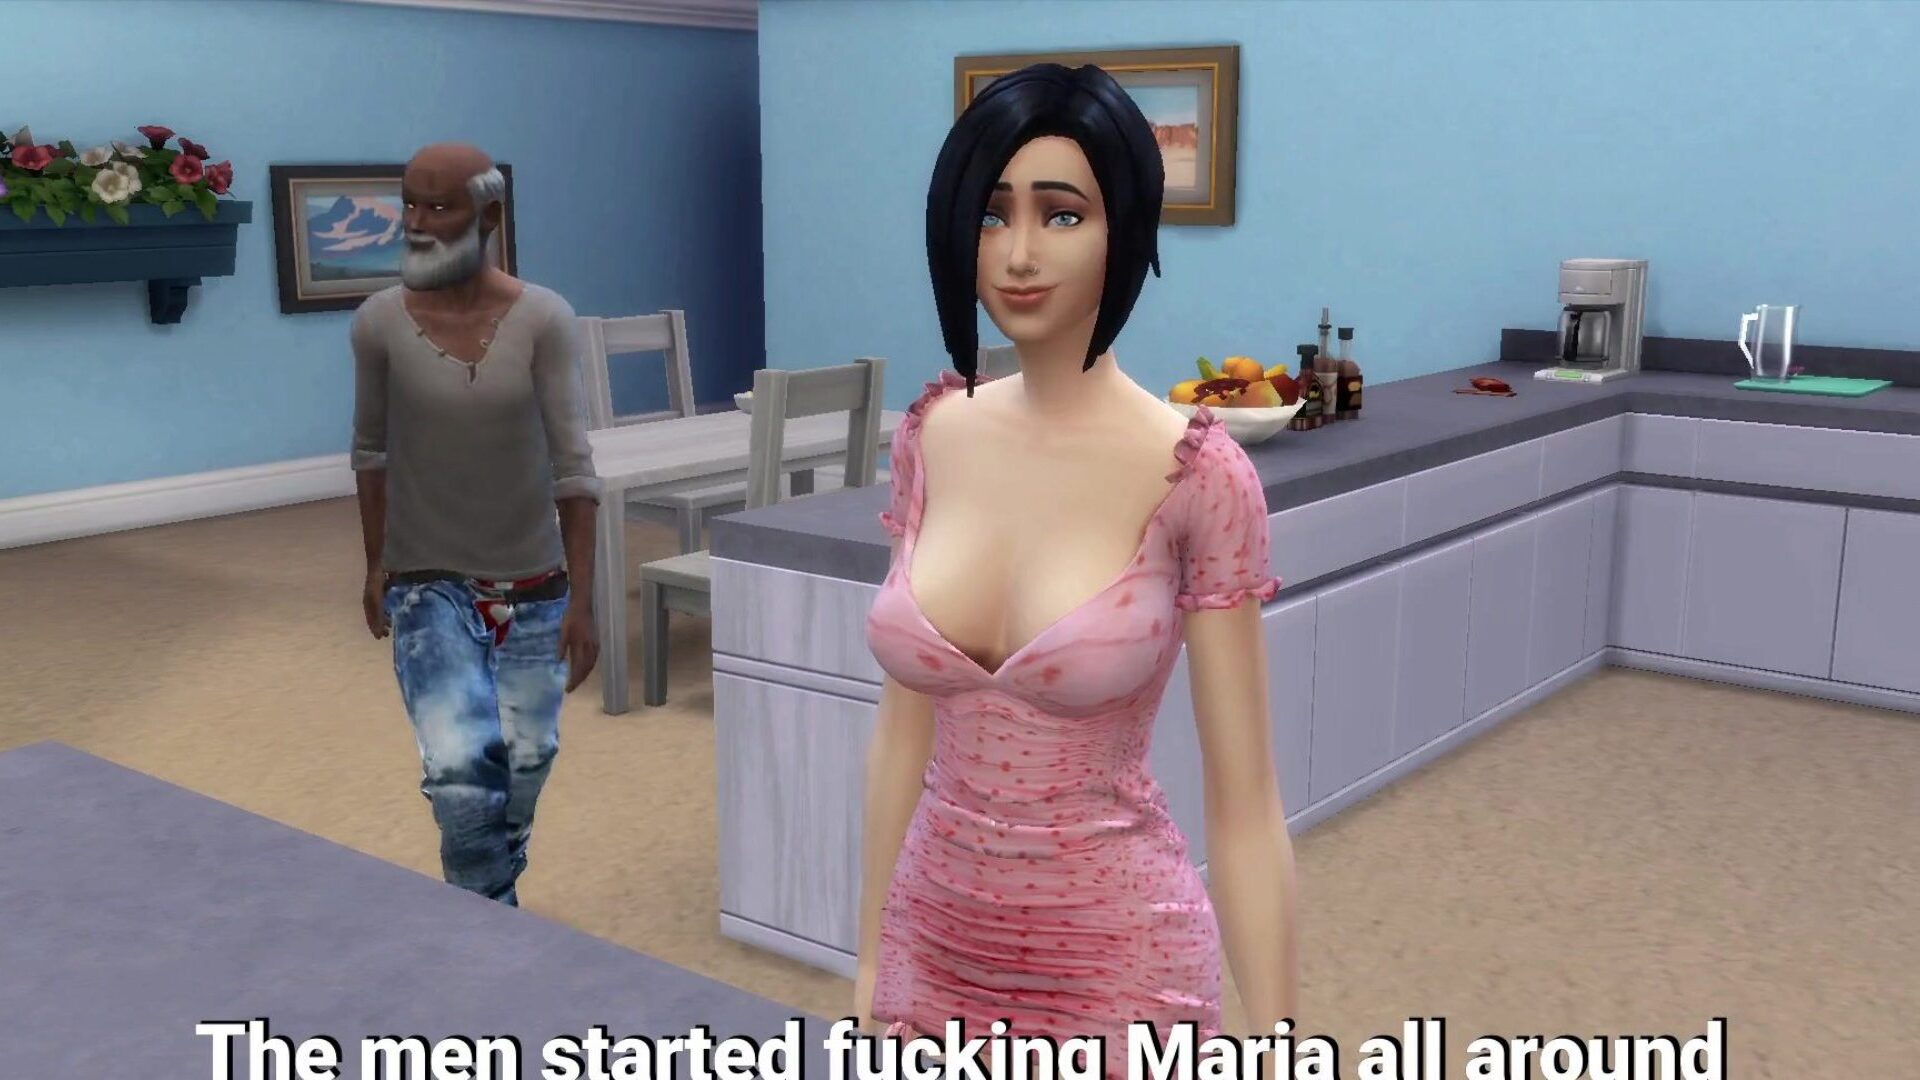 DDSims - Cuckold Watches Wife Get Impregnated by Homeless - Sims 4 Aug 14th 2021